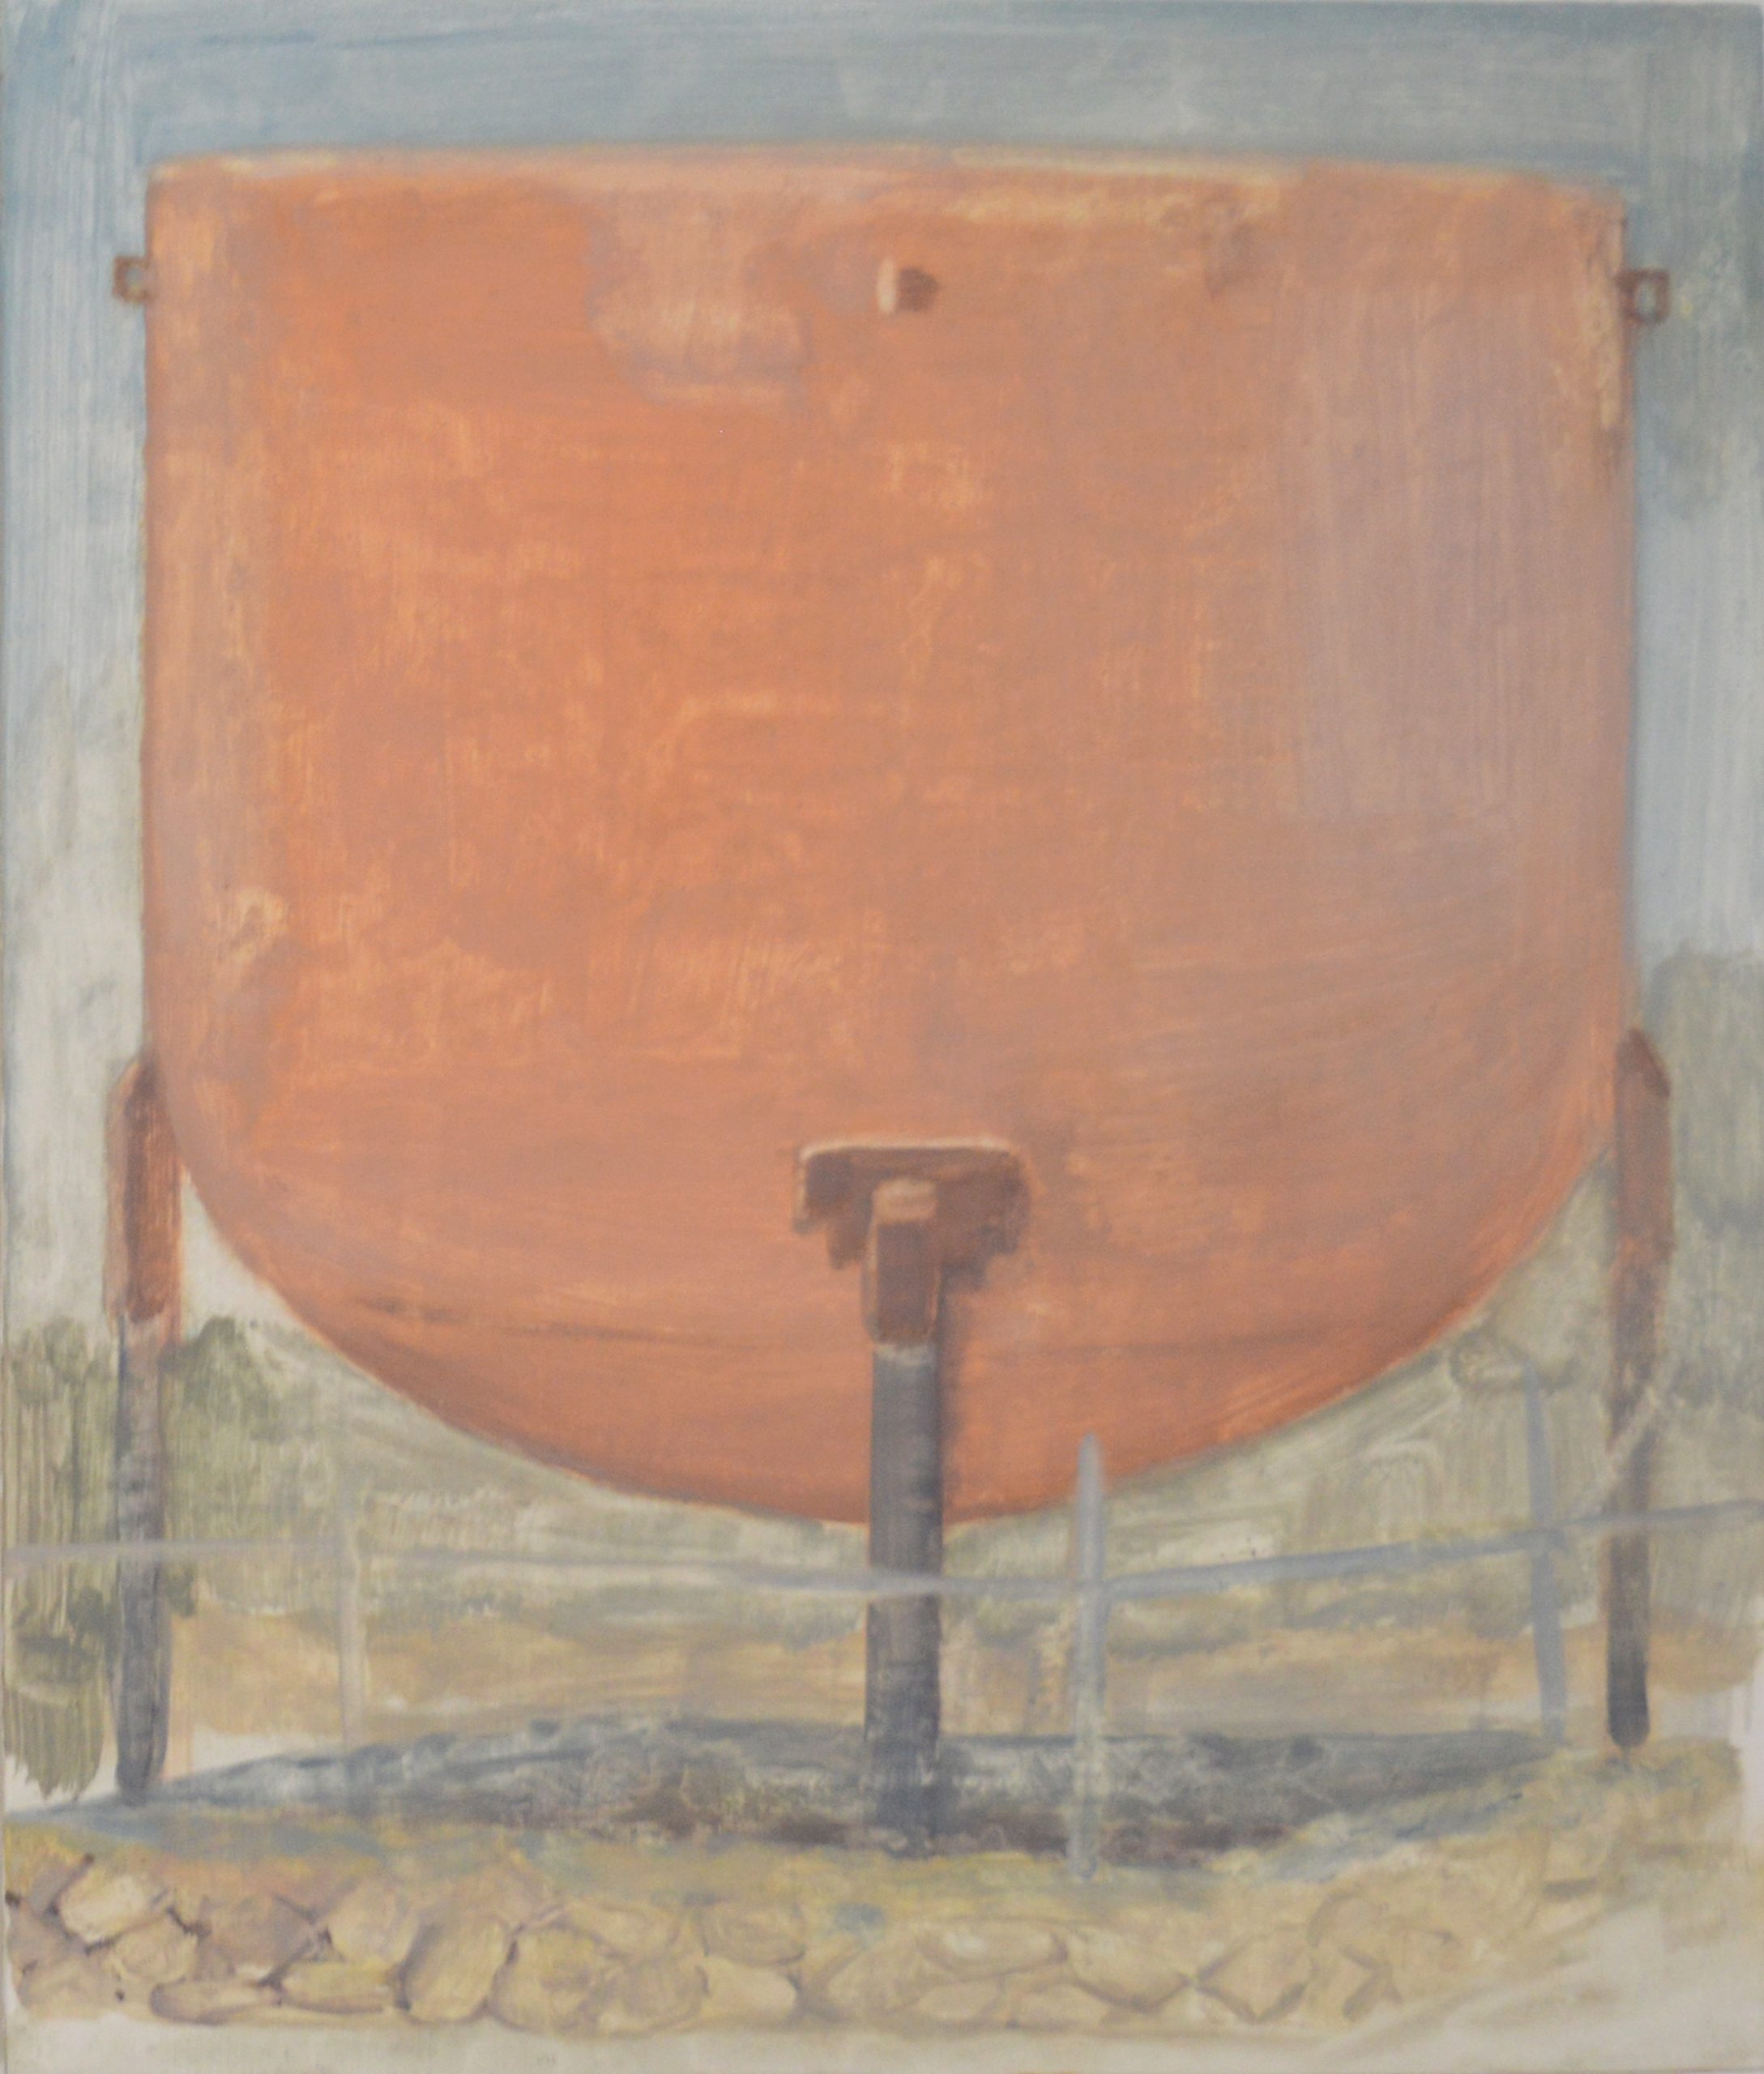 Water tower, 2018, 27x23cm, oil on wood